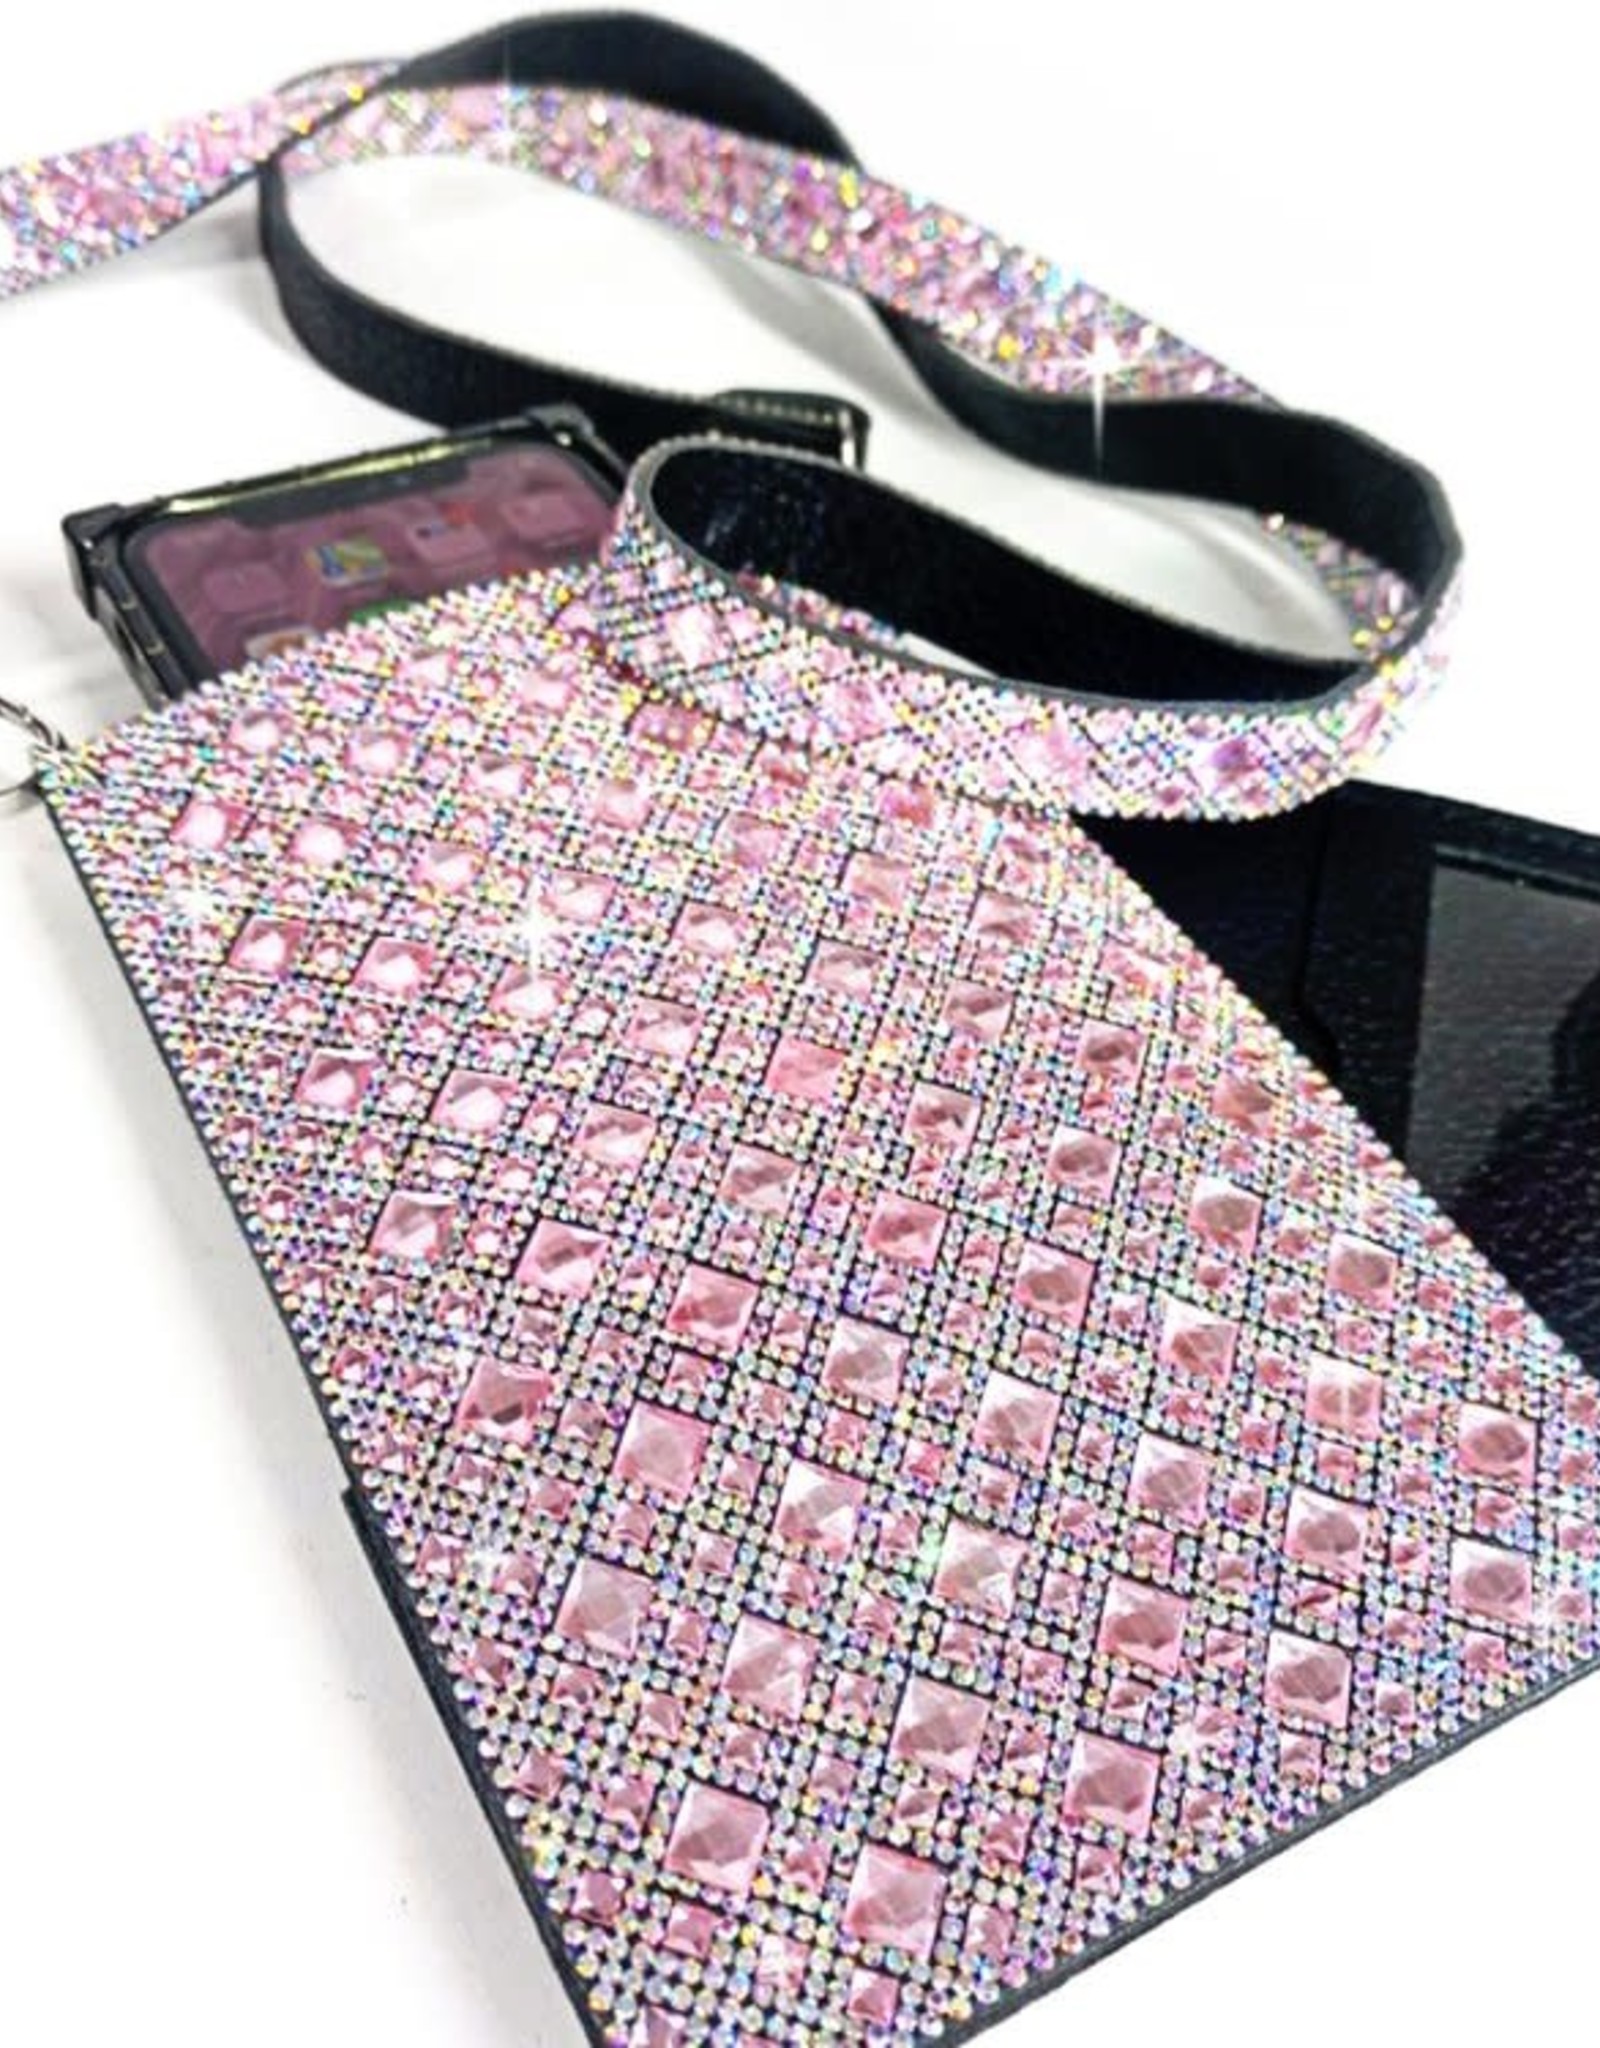 - Flamingo Pink Bling Cell Phone Purse